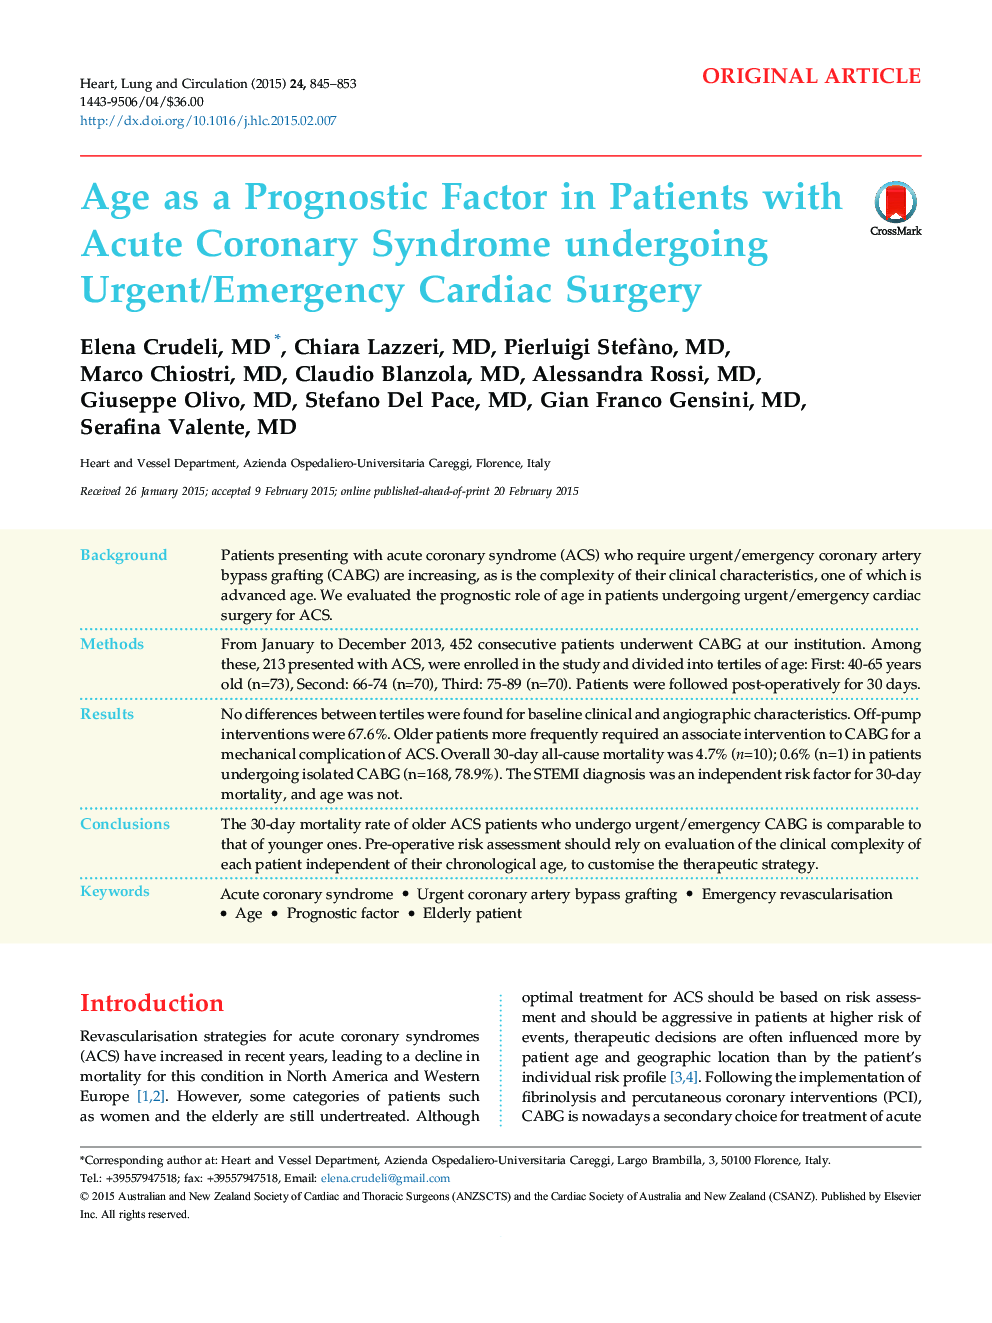 Age as a Prognostic Factor in Patients with Acute Coronary Syndrome undergoing Urgent/Emergency Cardiac Surgery